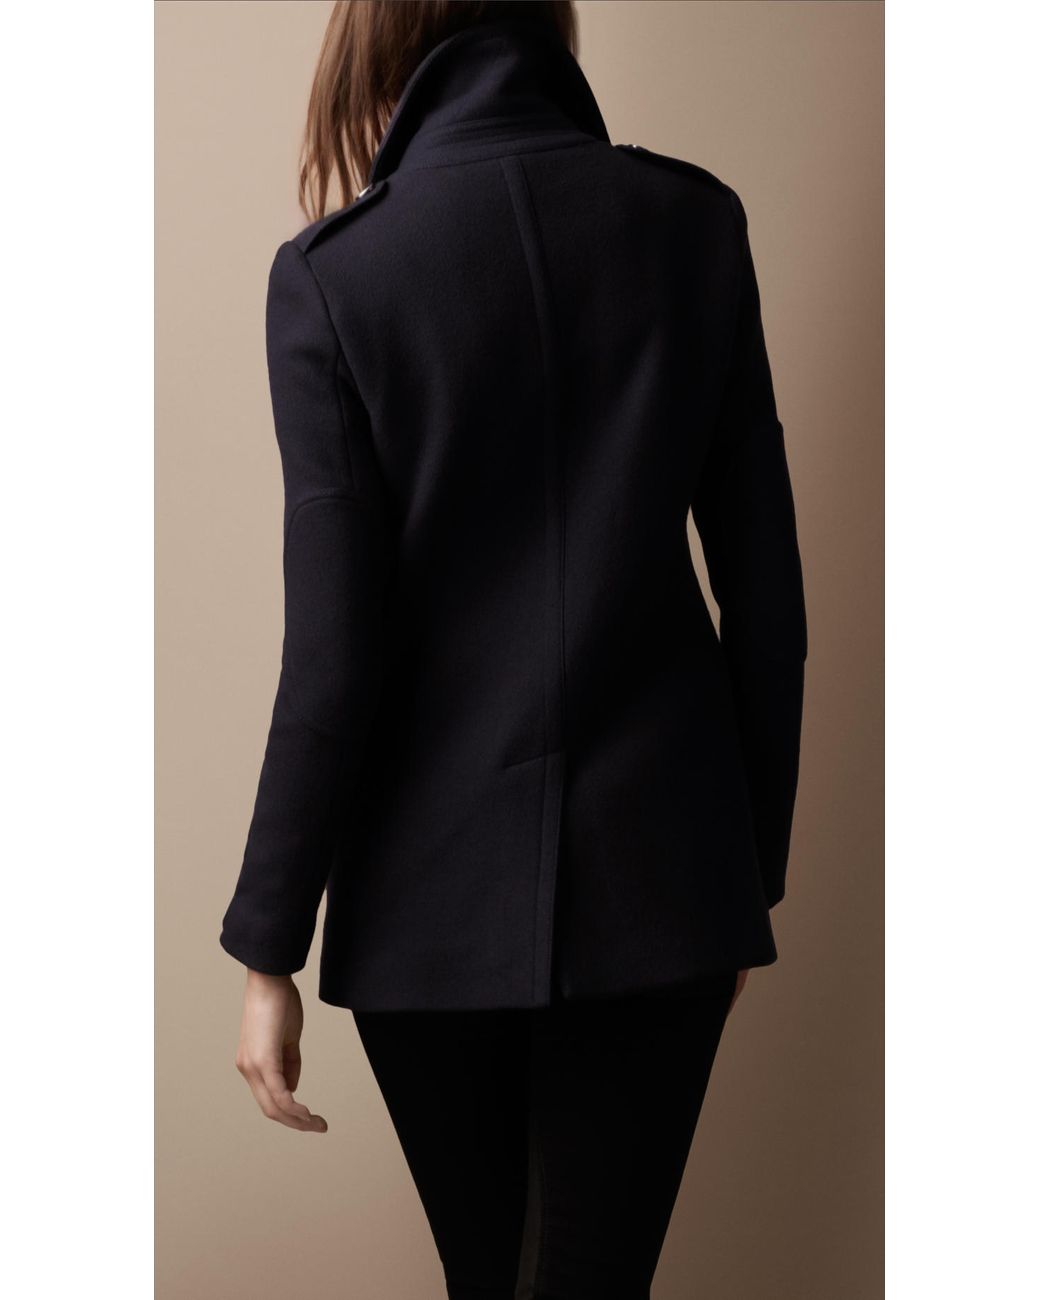 Burberry Brit Classic Wool Pea Coat in Navy (Blue) | Lyst